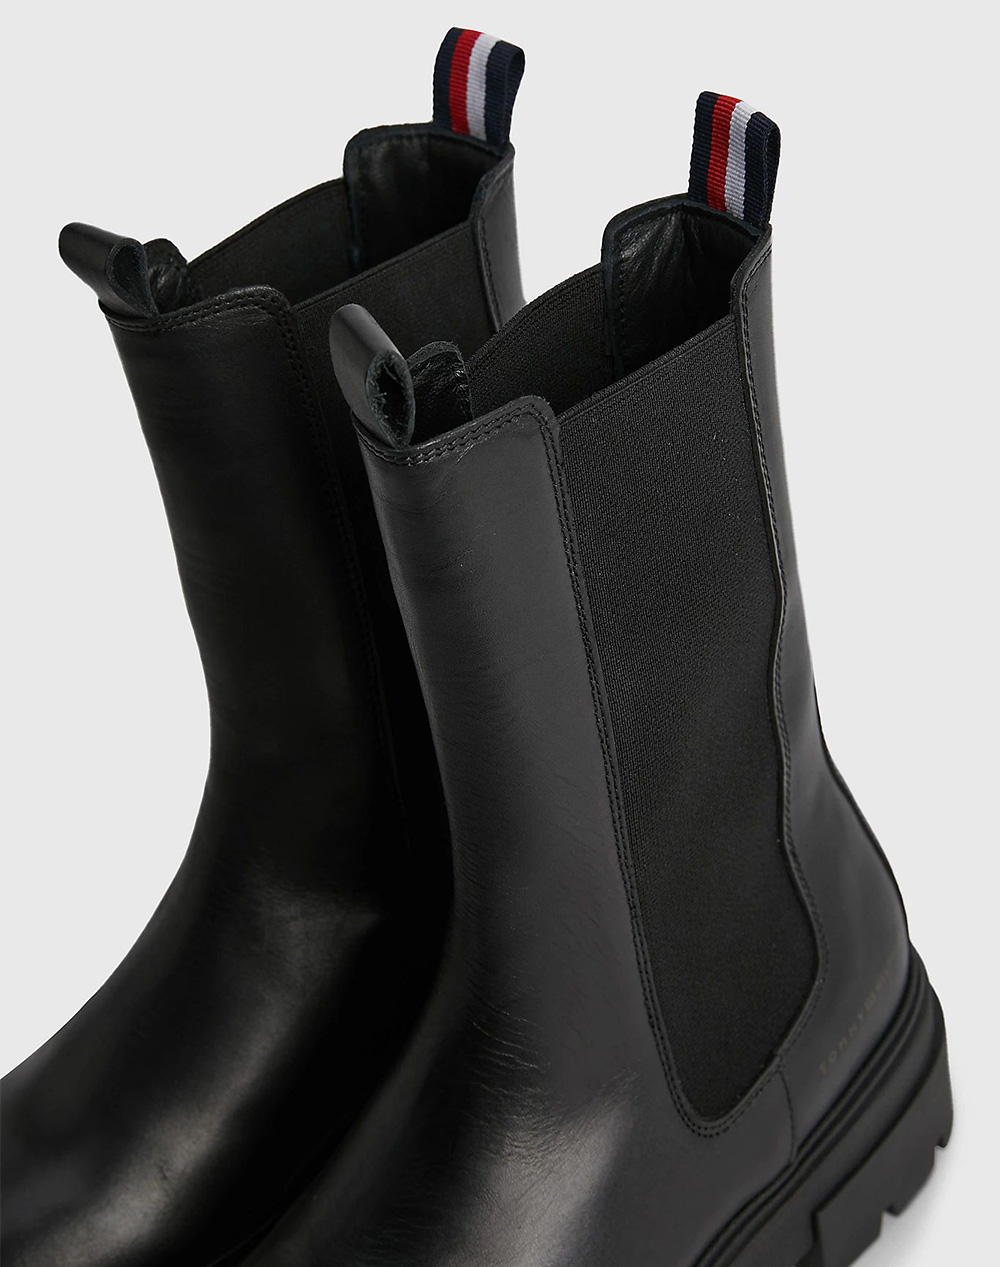 TOMMY HILFIGER MONOCHROMATIC CHELSEA BOOT